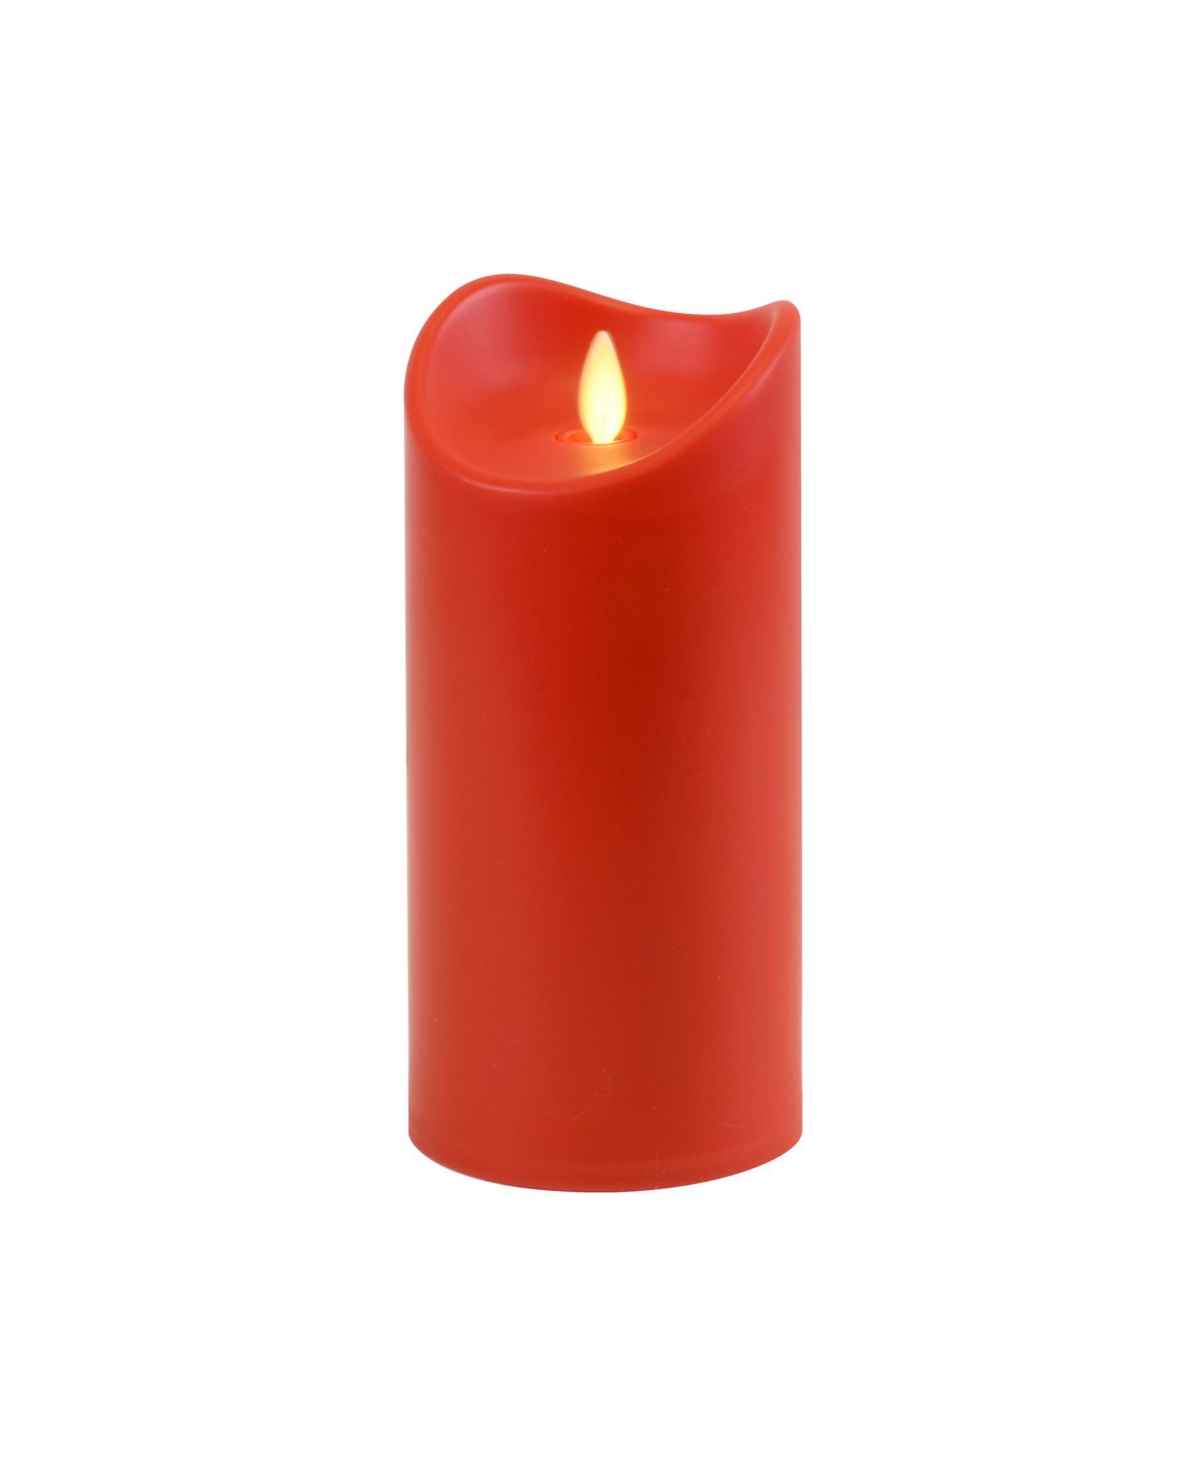 Battery Operated 5" Pillar Candle with Moving Flame - Red